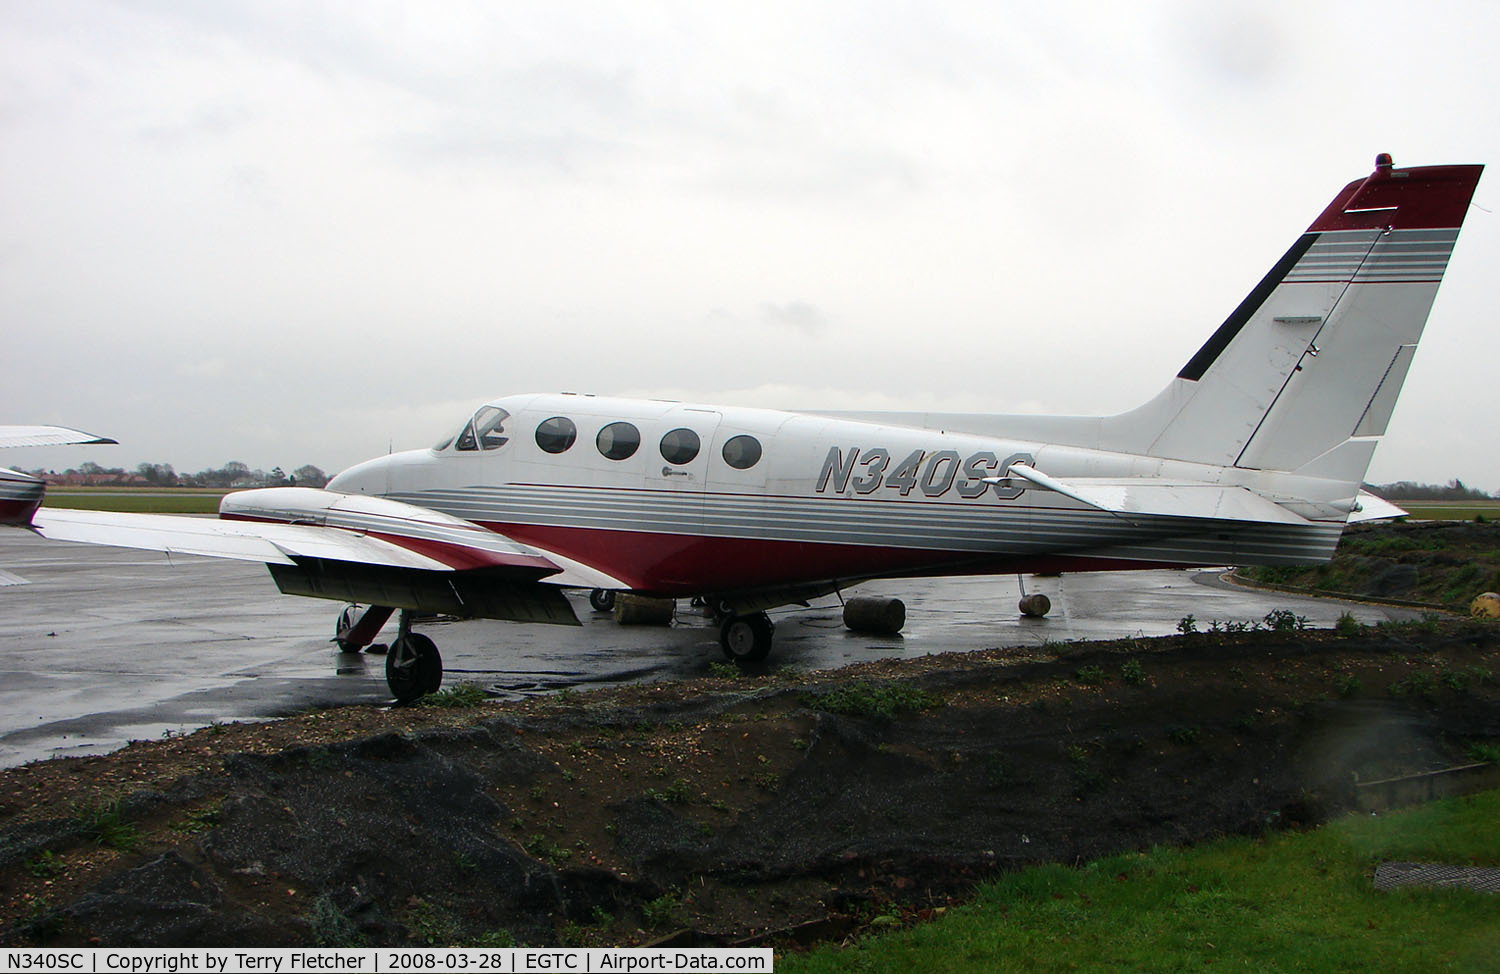 N340SC, 1974 Cessna 340 C/N 340-0363, Part of the General Aviation activity at Cranfield